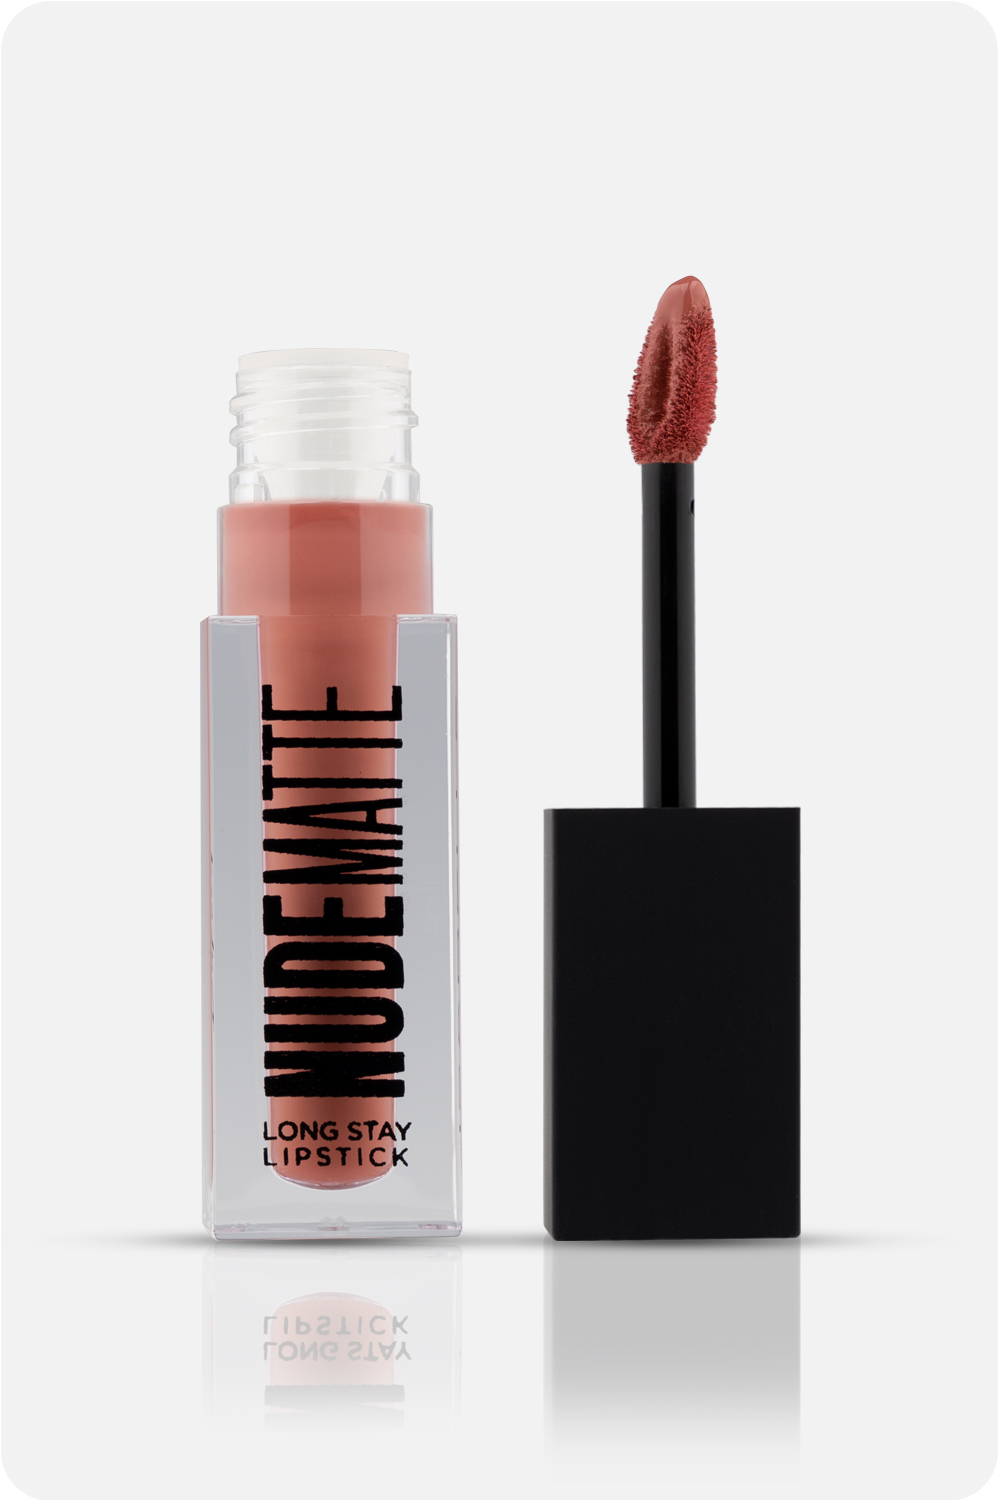 Isabelle Dupont Nude Matte Long Stay Lipstick